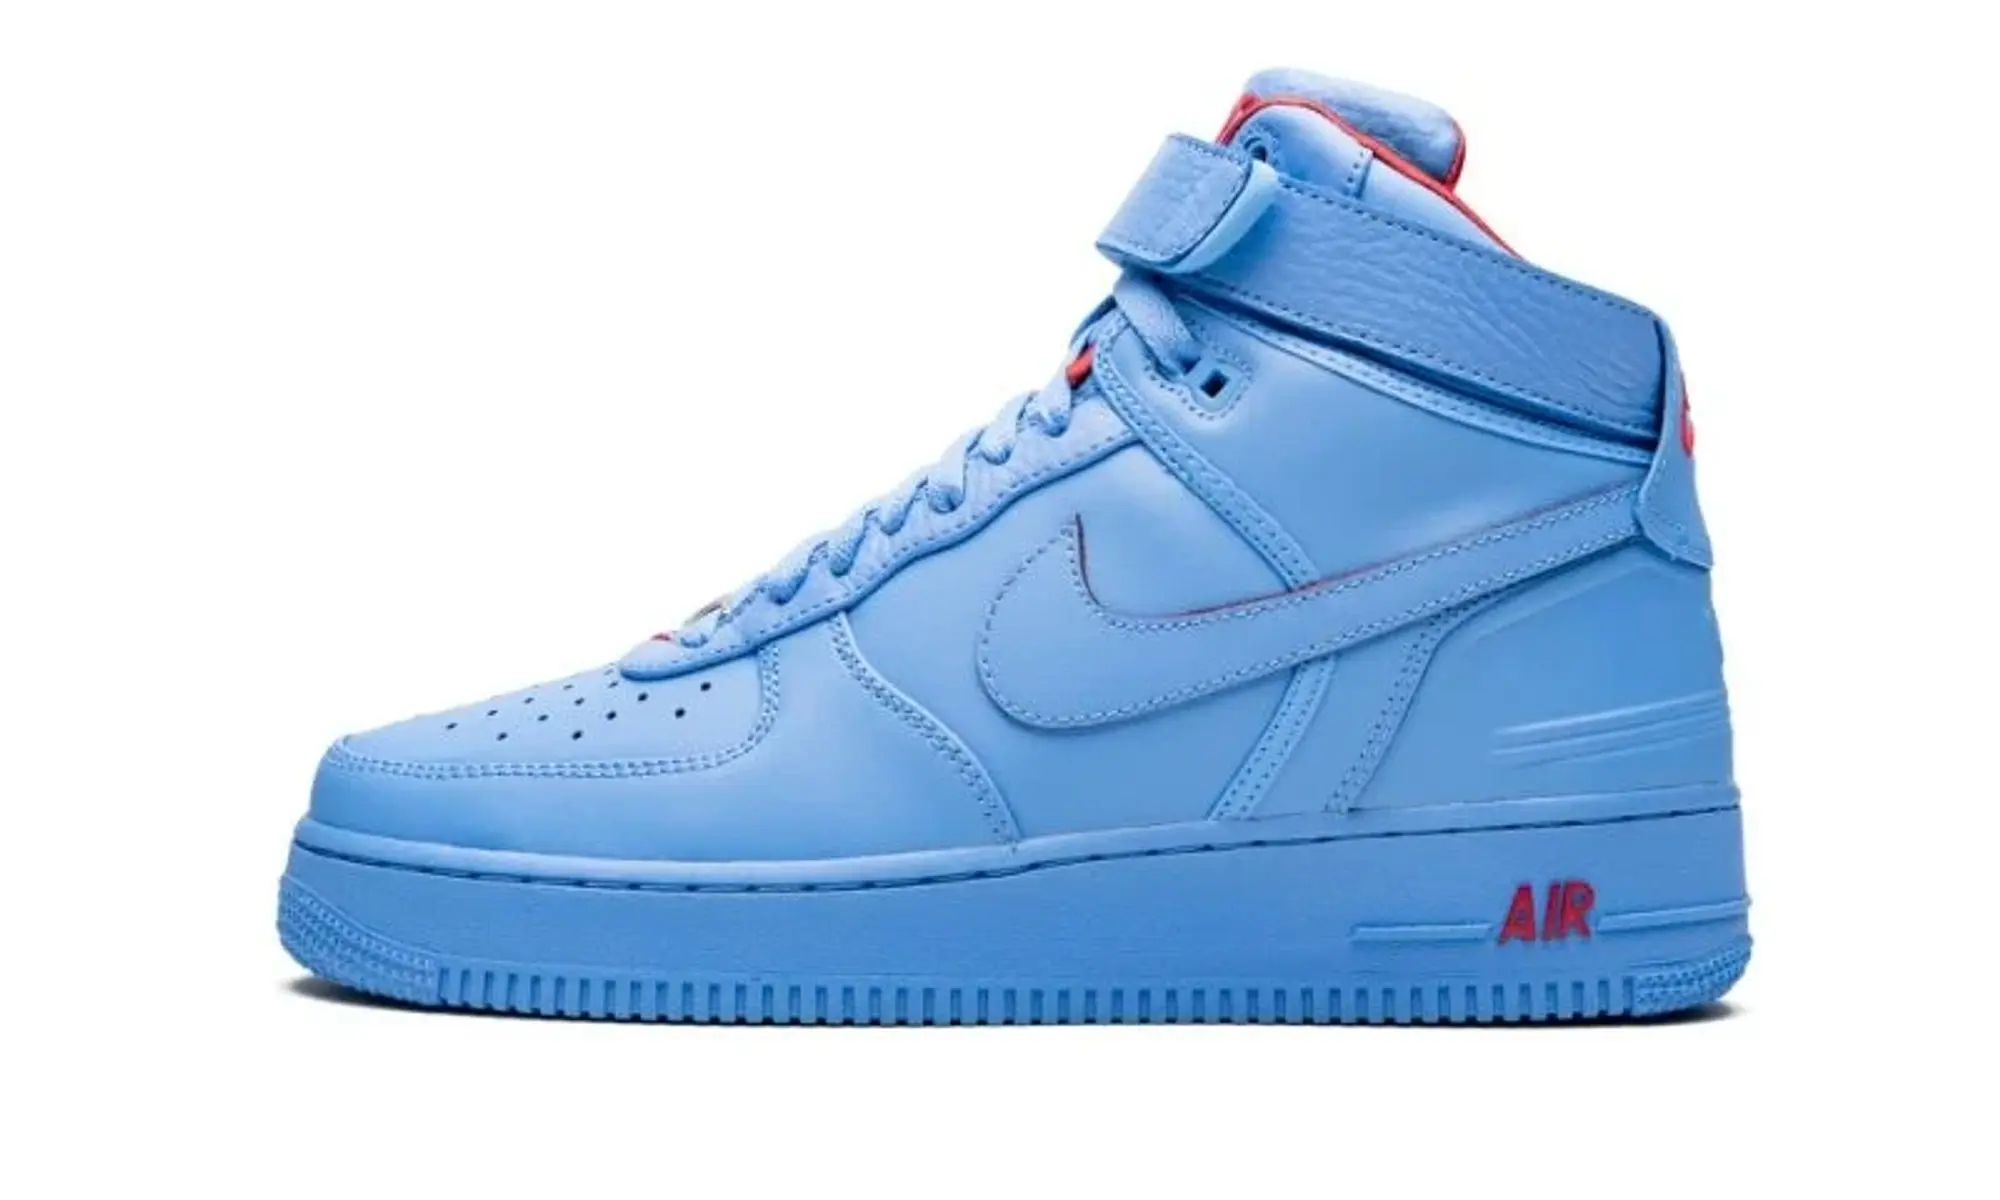 Nike Air Force 1 High Just Don - Varsity Blue Shoes